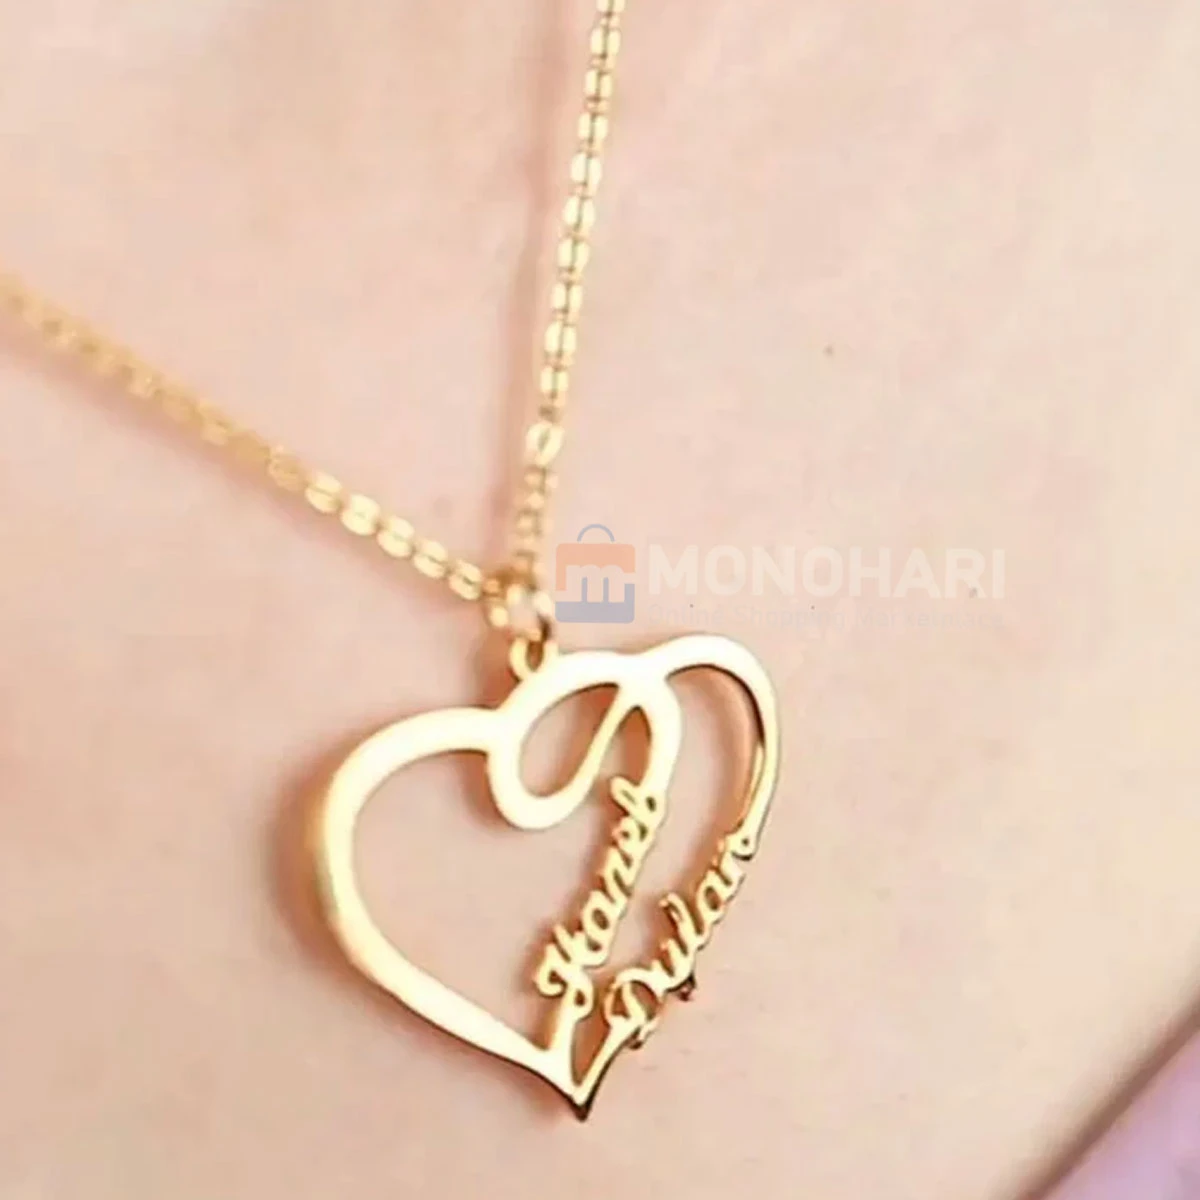 Couple Name Necklace (Rames Sahhle) Side Heart Shape 22K Gold Plated Customized Necklace